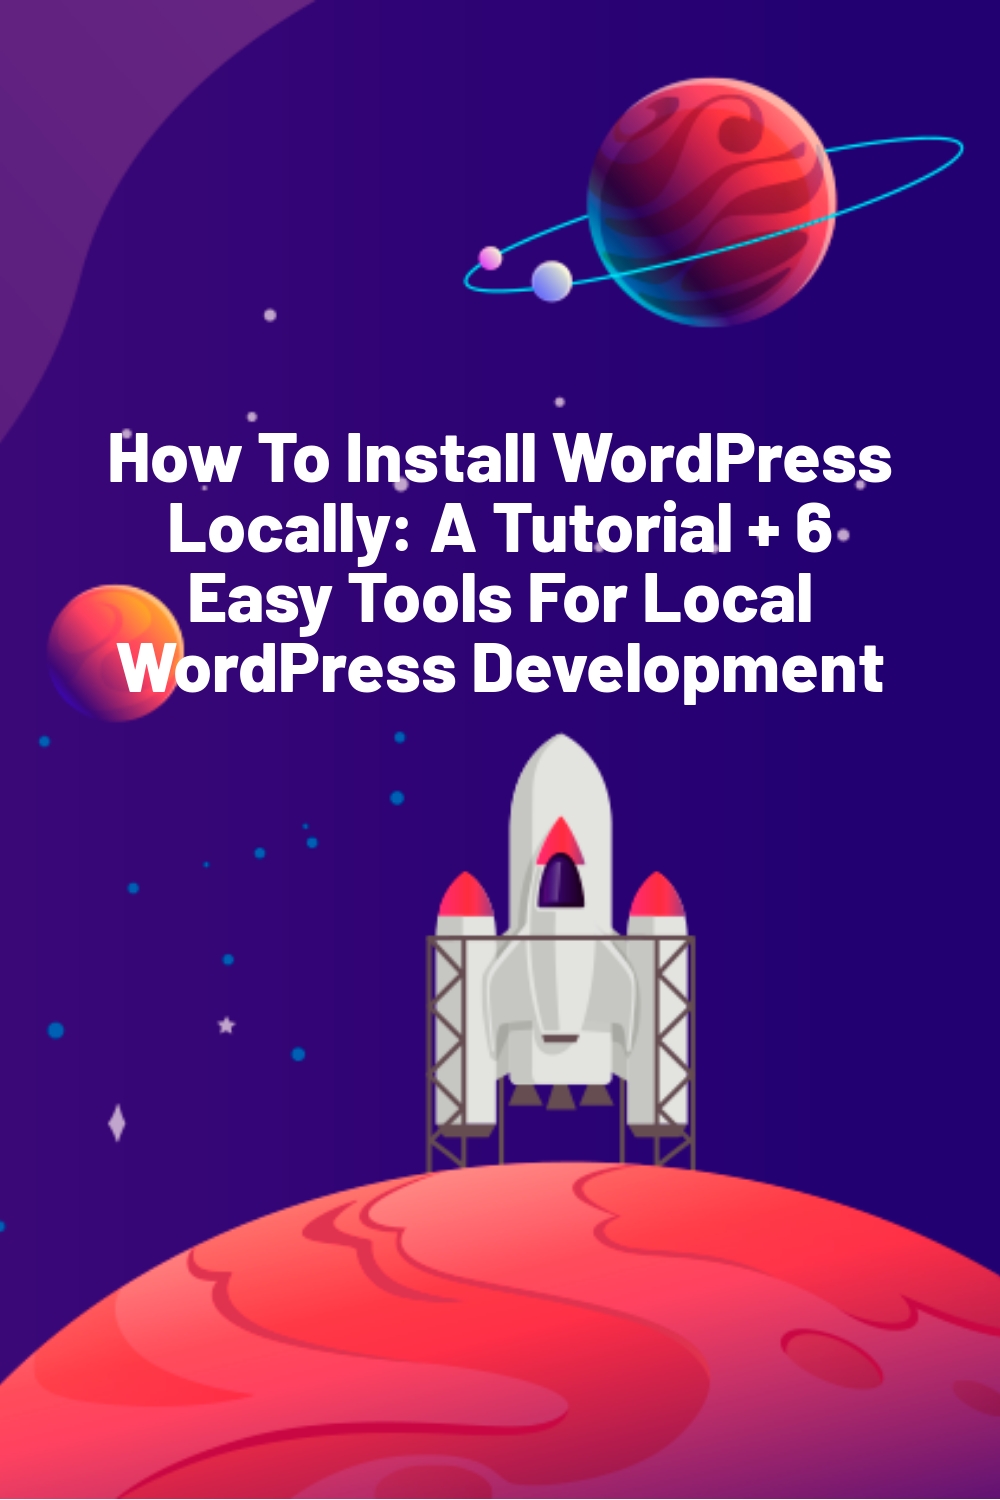 How To Install WordPress Locally: A Tutorial + 6 Easy Tools For Local WordPress Development